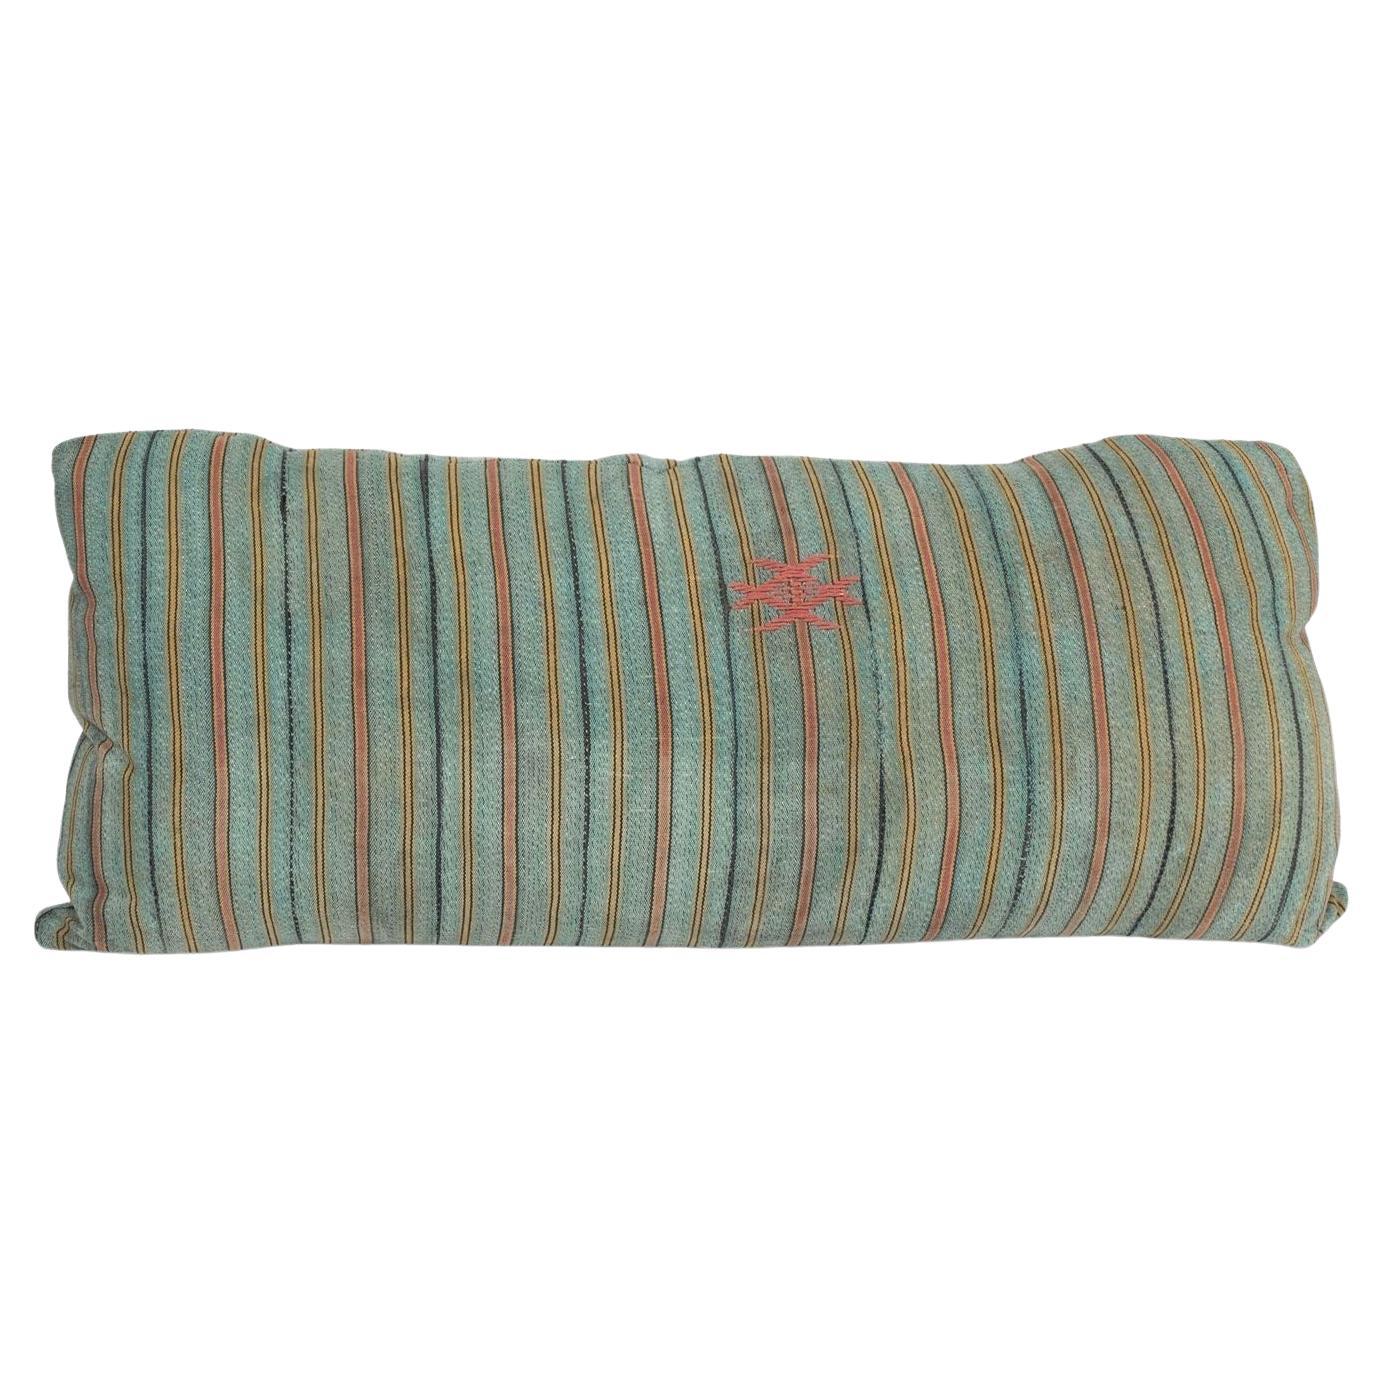 Large Teal, Gold, Navy and Coral Striped Print Lumbar Cushion For Sale